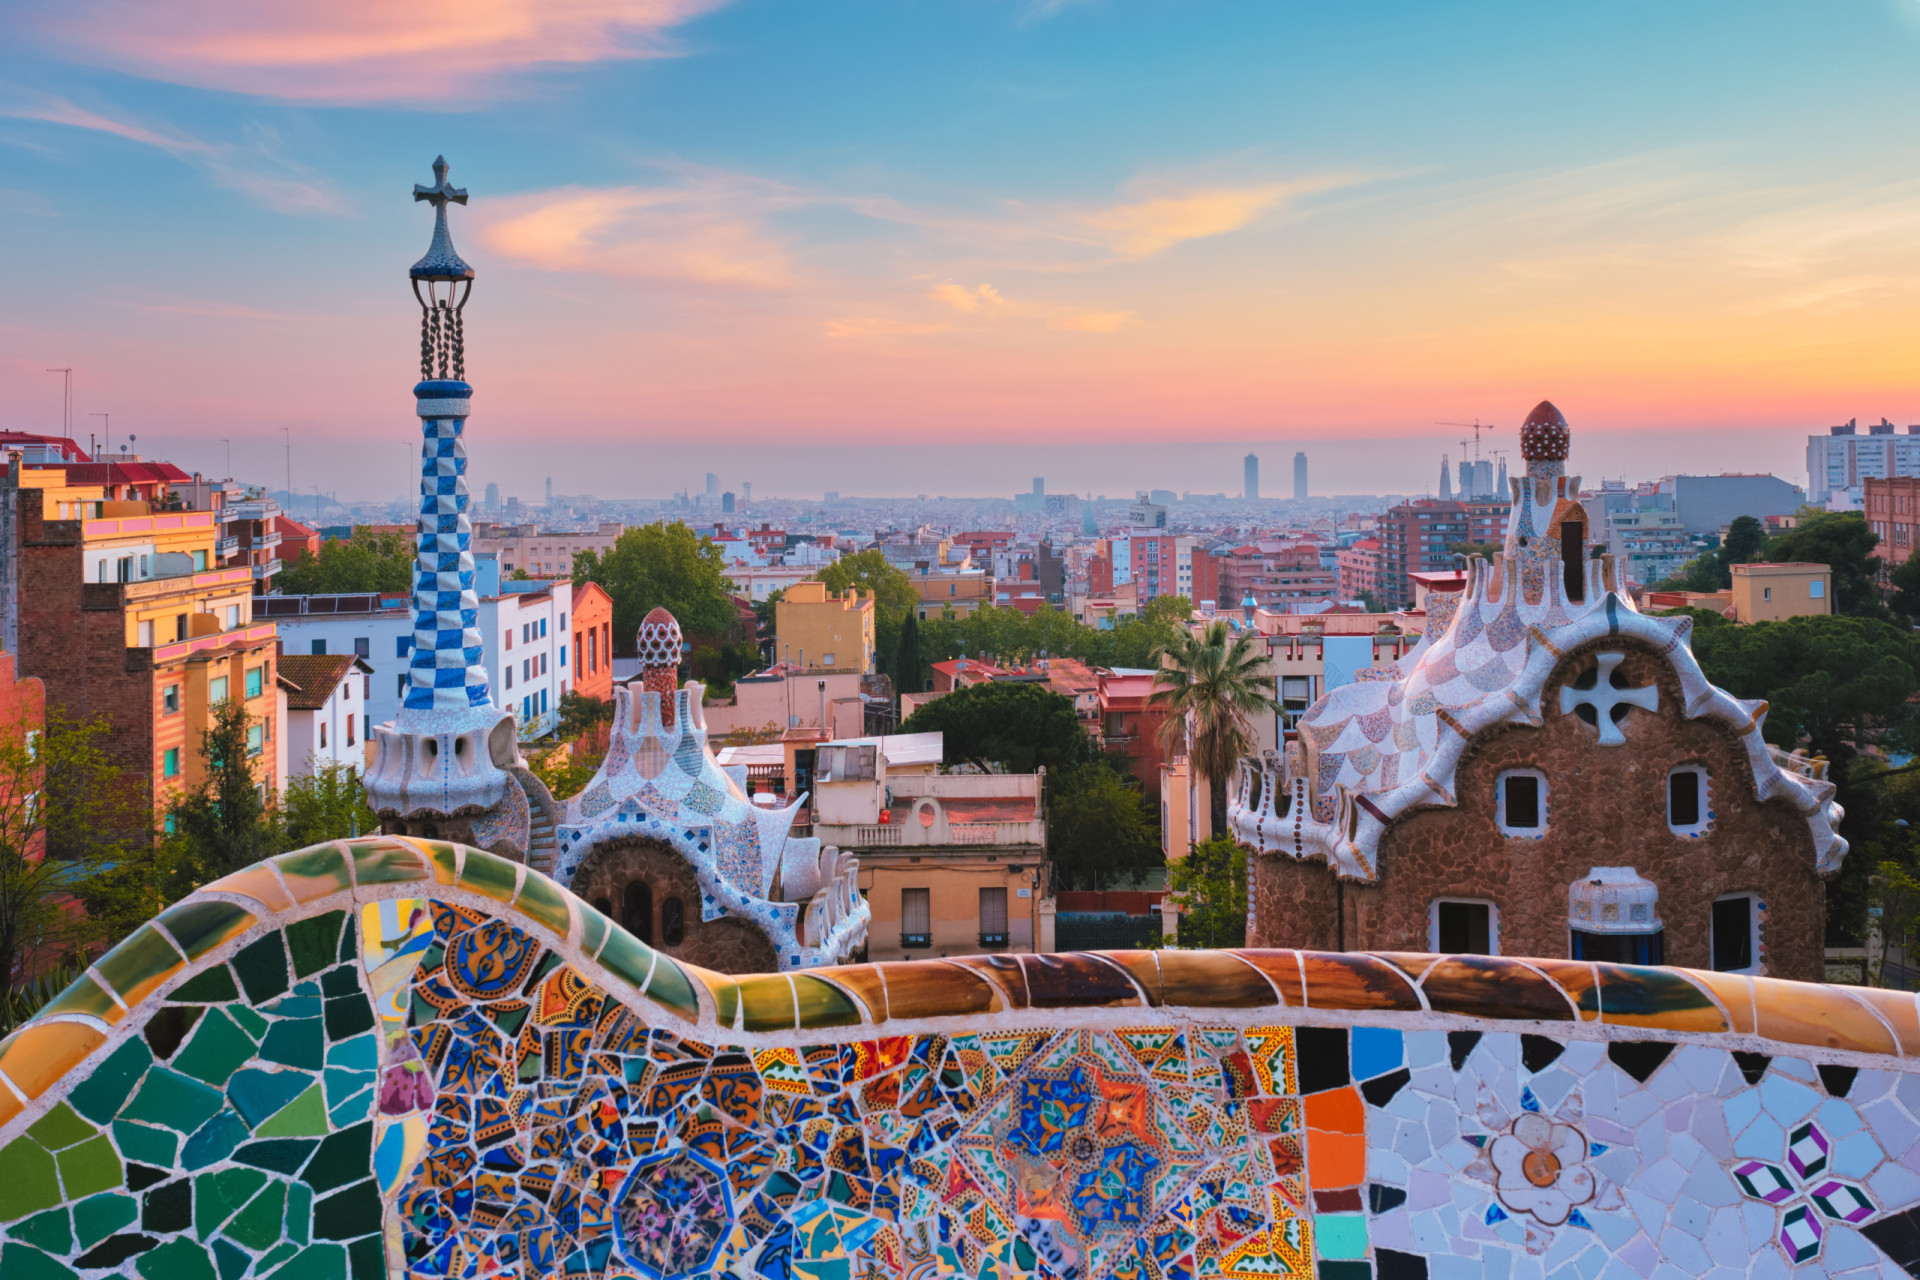 <p>Several cities in Spain have recently decided to raise the price of their tourist tax, including Barcelona, where the fee is €4 (US$4.54) per night.</p><p><a href="https://www.msn.com/en-ph/community/channel/vid-7xx8mnucu55yw63we9va2gwr7uihbxwc68fxqp25x6tg4ftibpra?cvid=94631541bc0f4f89bfd59158d696ad7e">Follow us and access great exclusive content every day</a></p>